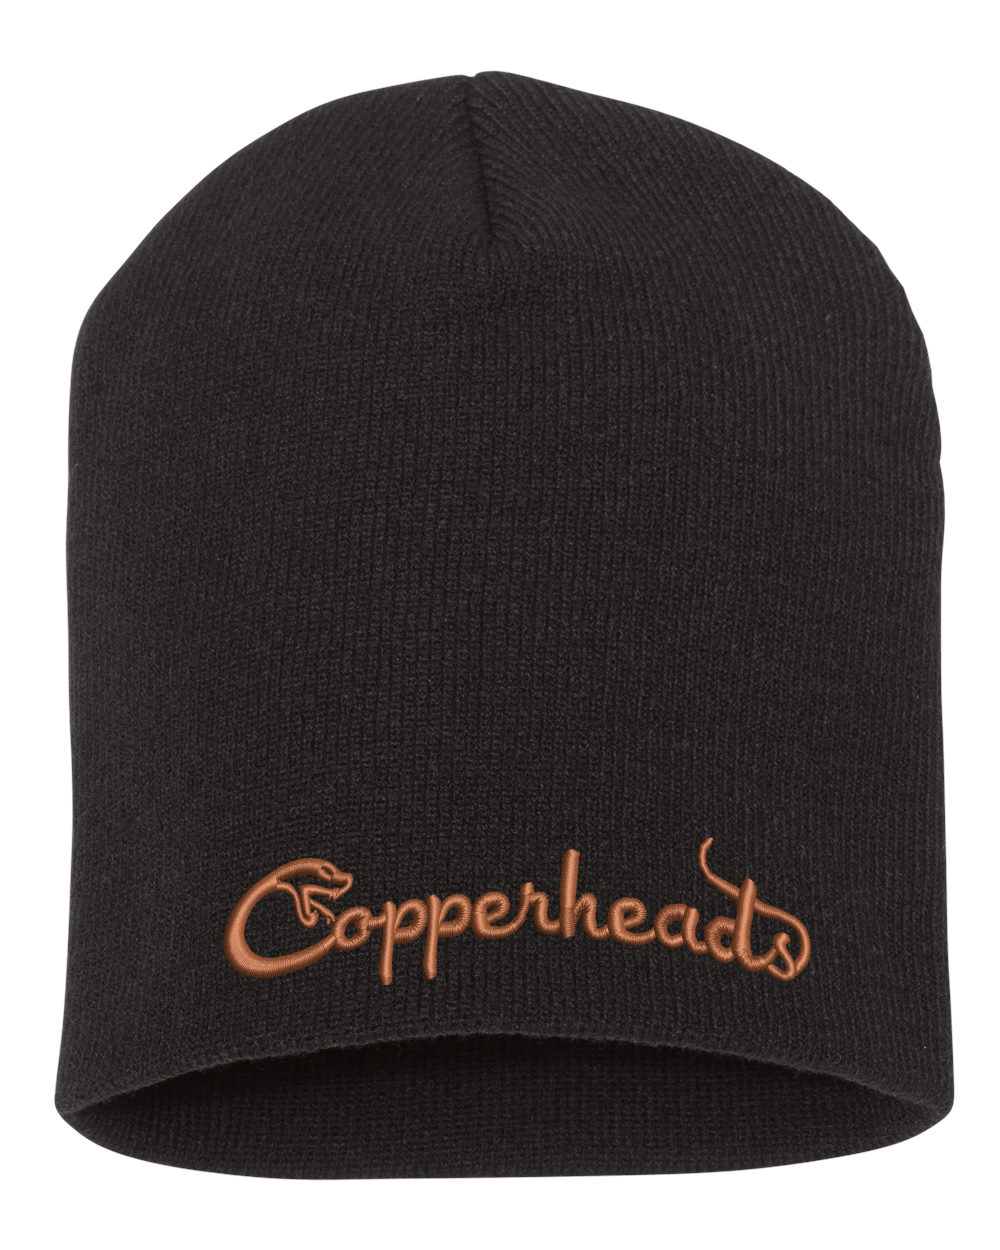 Copperheads Embroidered Beanie